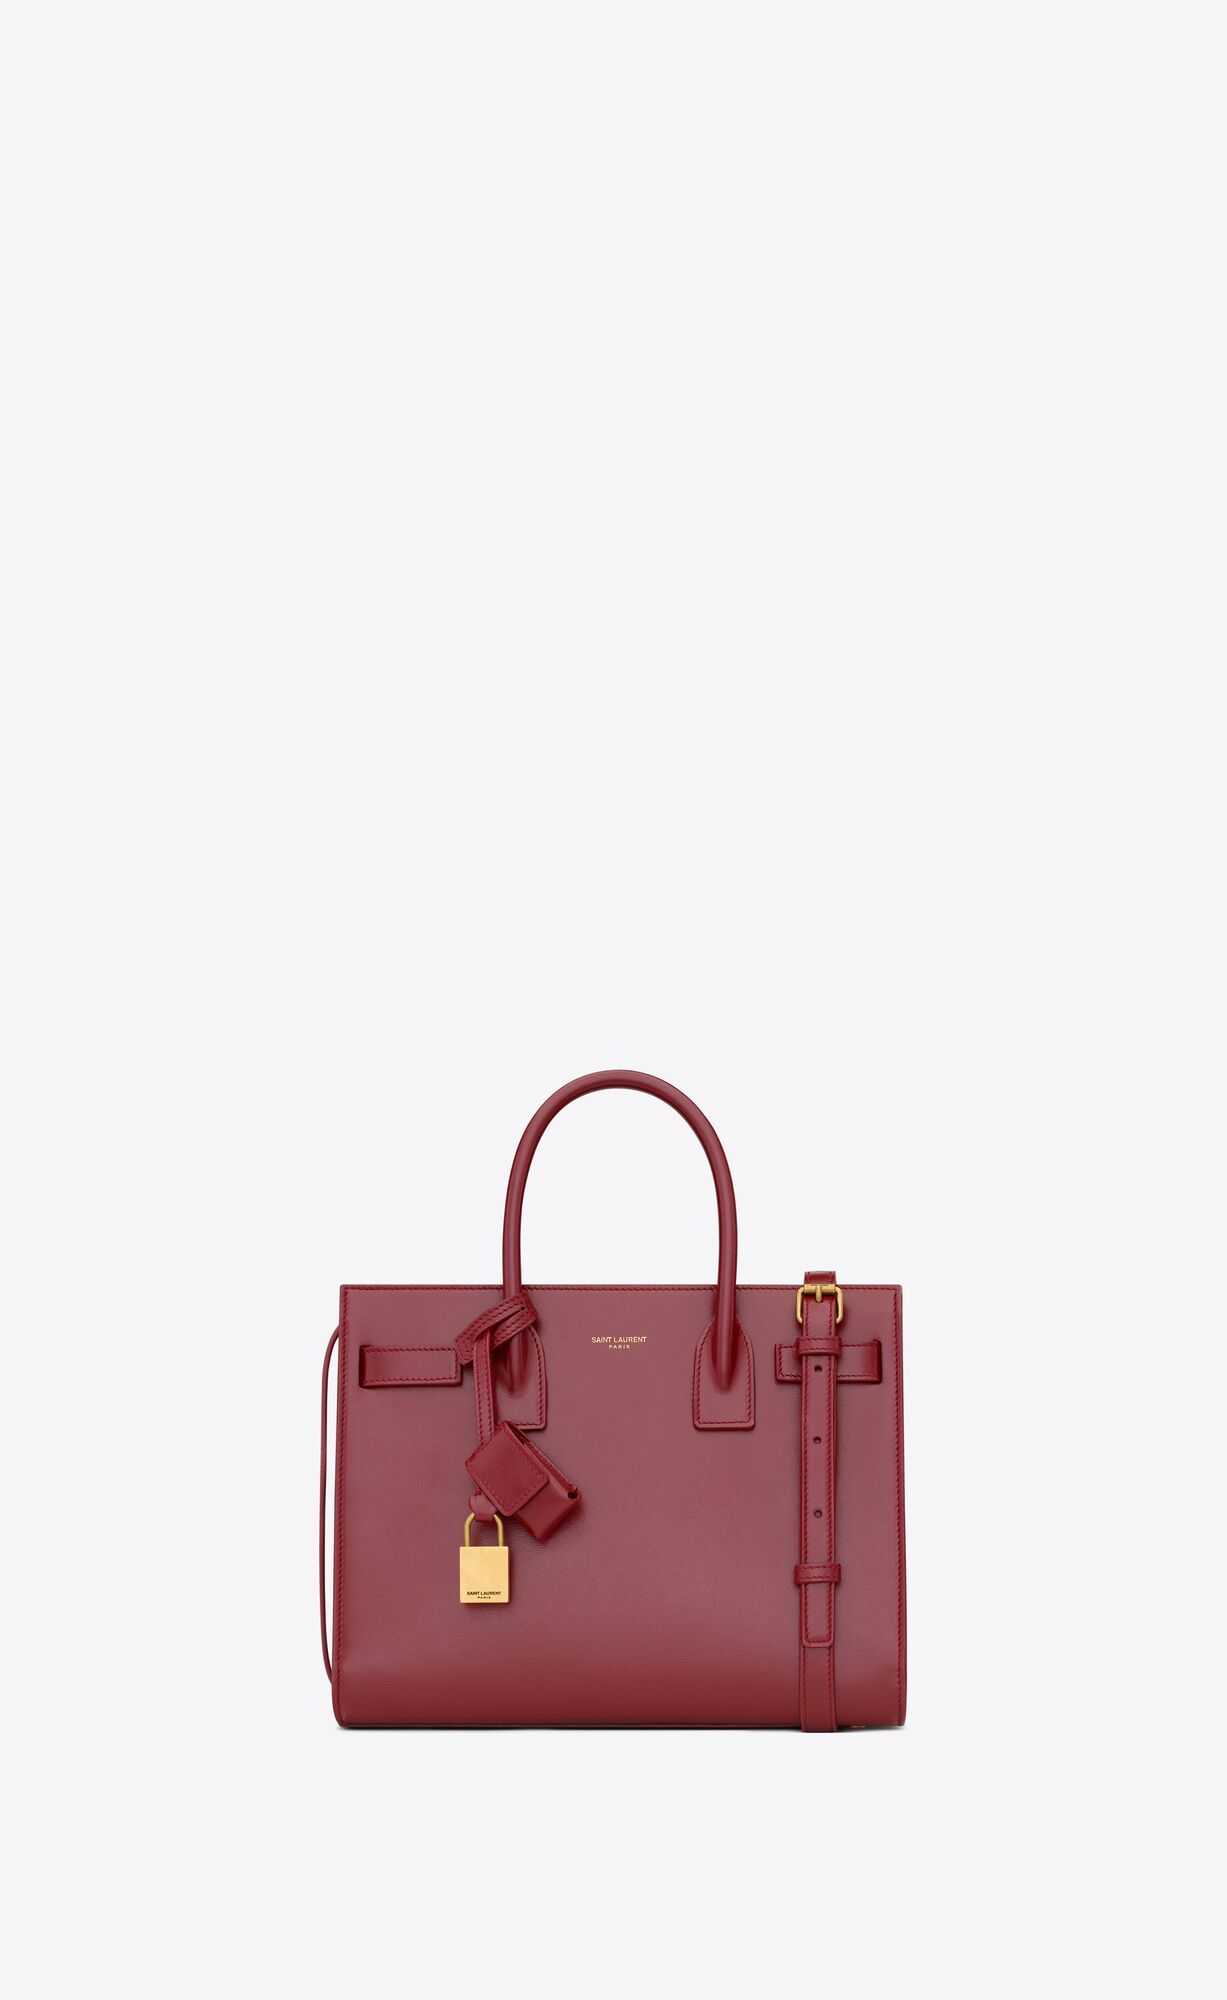 Sac de jour bag in intermediate size.SPACIOUS and leather-lined, it is distinguishable by its acc... | Saint Laurent Inc. (Global)